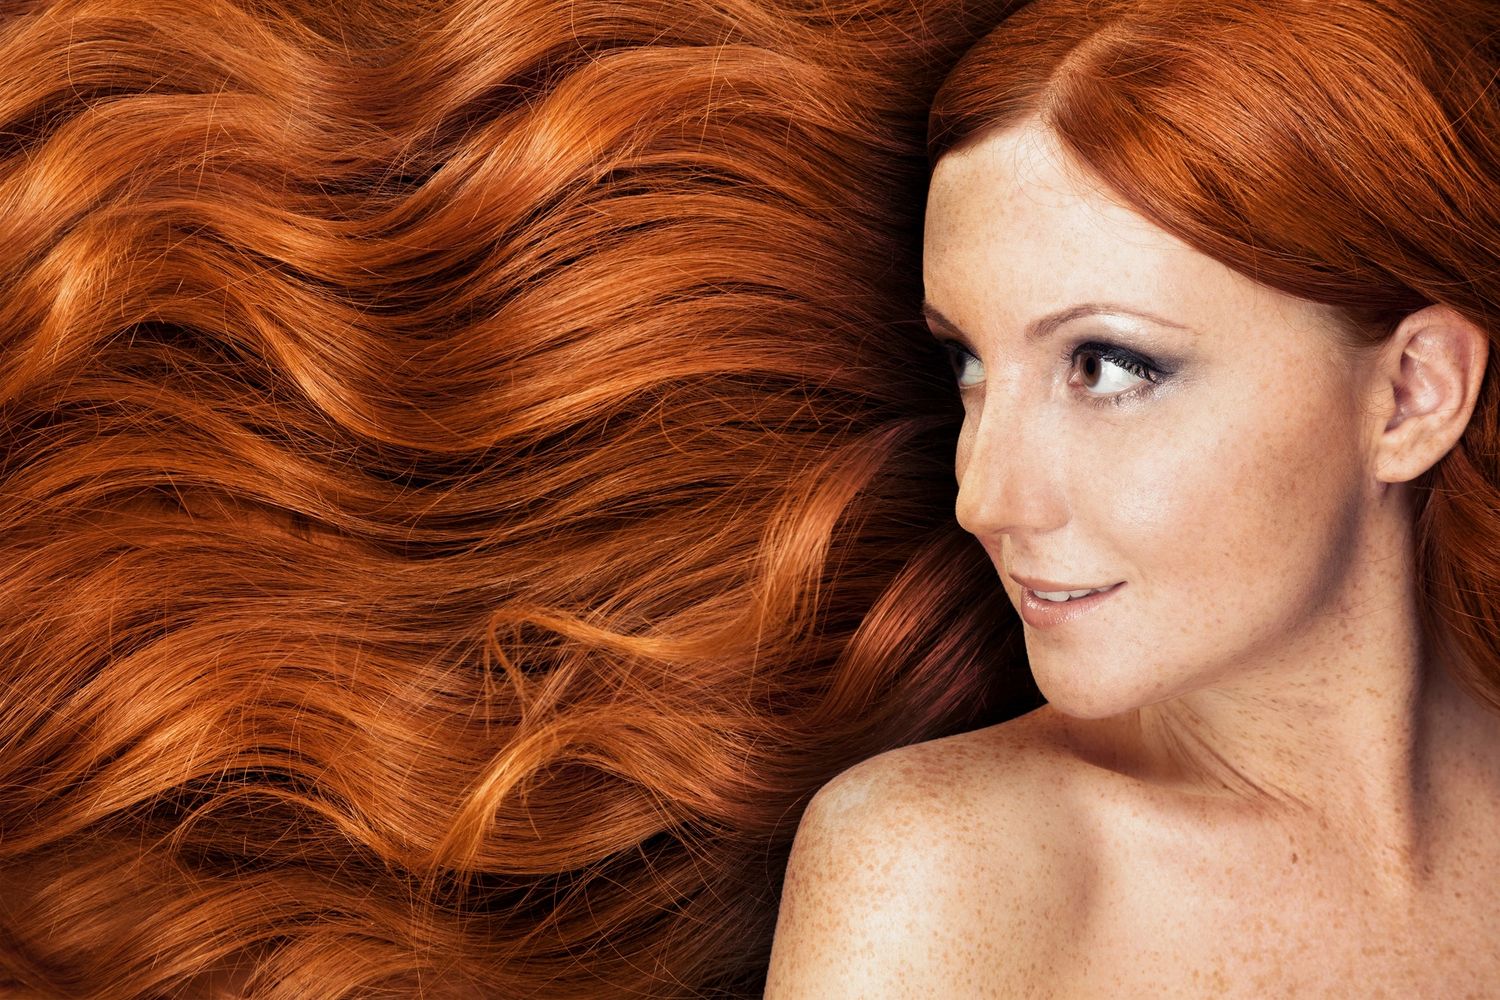 Woman with long red hair and sculpted eyebrows